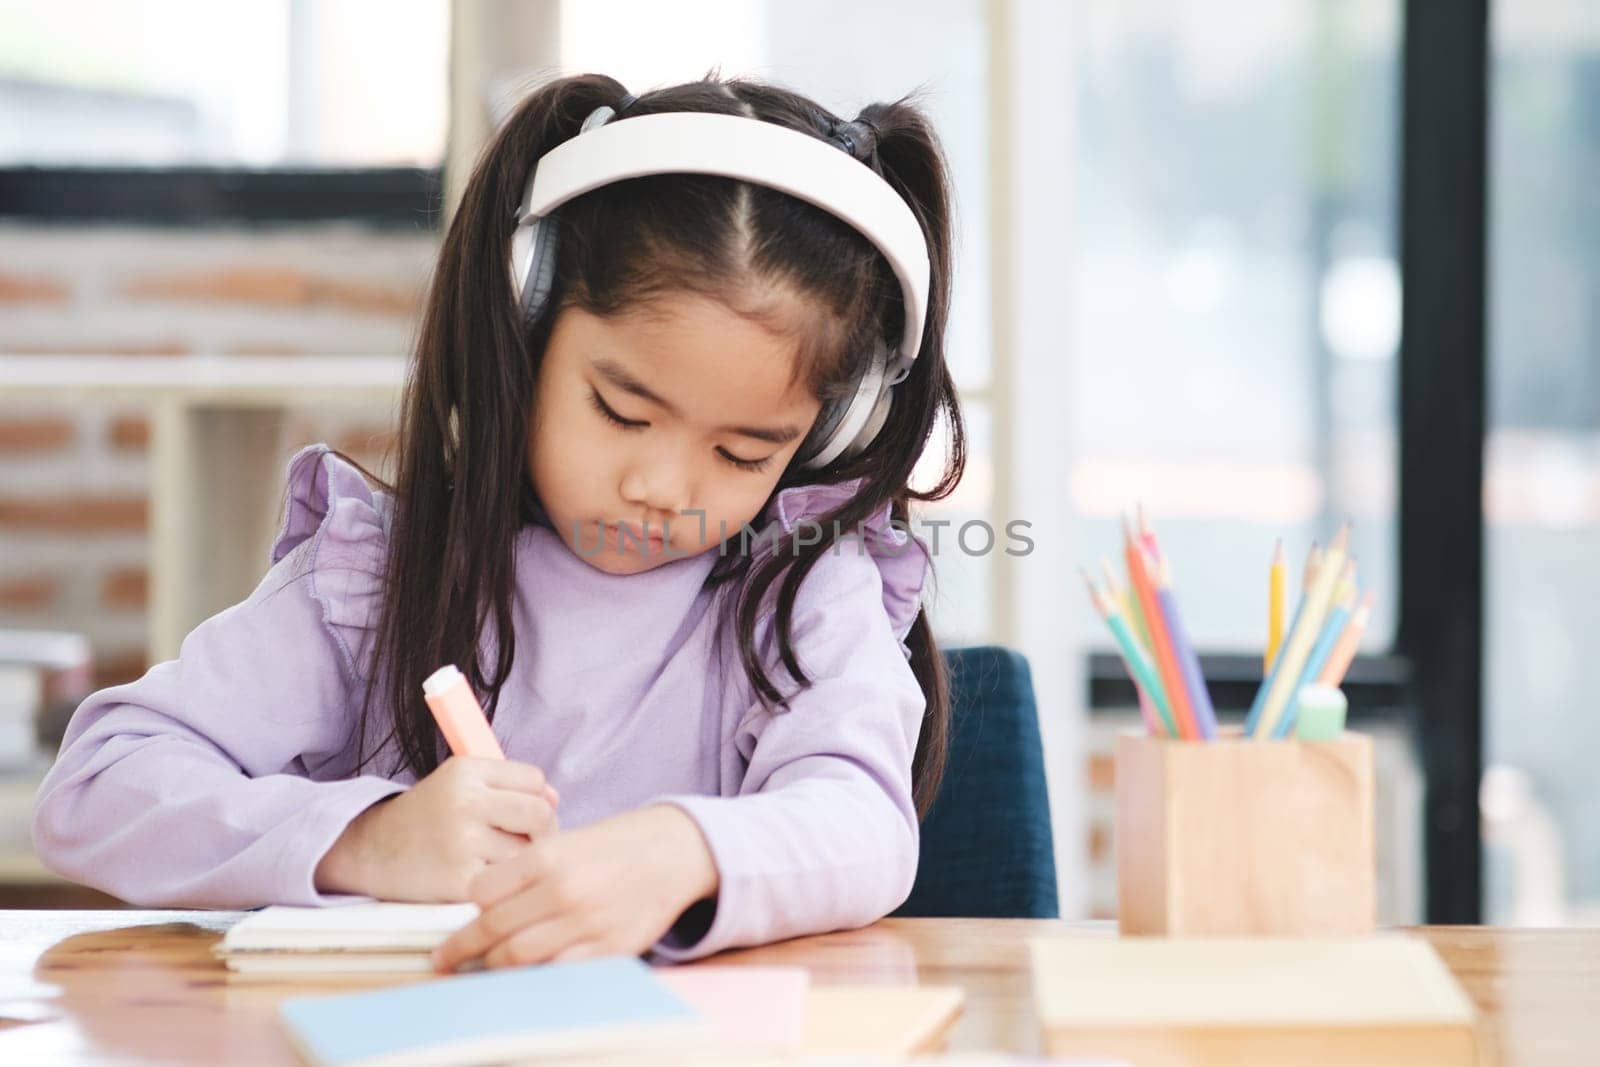 A young girl is sitting at a desk and writing in a notebook. She is wearing headphones and she is focused on her work. The scene suggests that she is engaged in a creative or educational activity